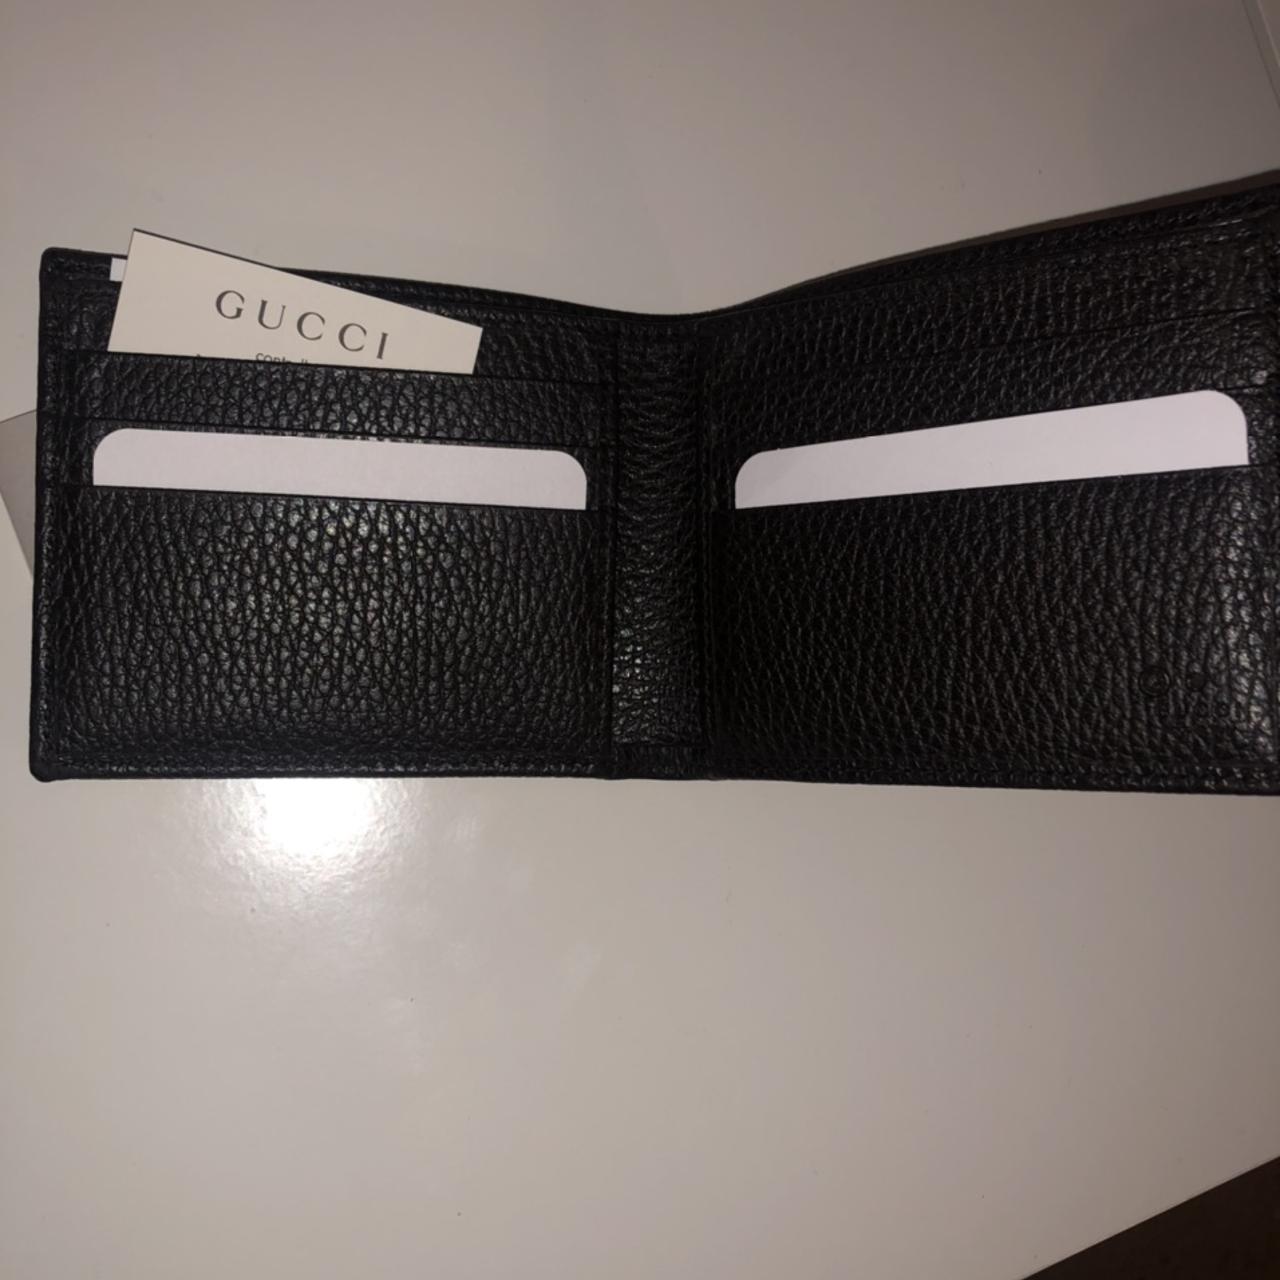 Authentic Vintage Gucci checkbook cover. Can be used - Depop